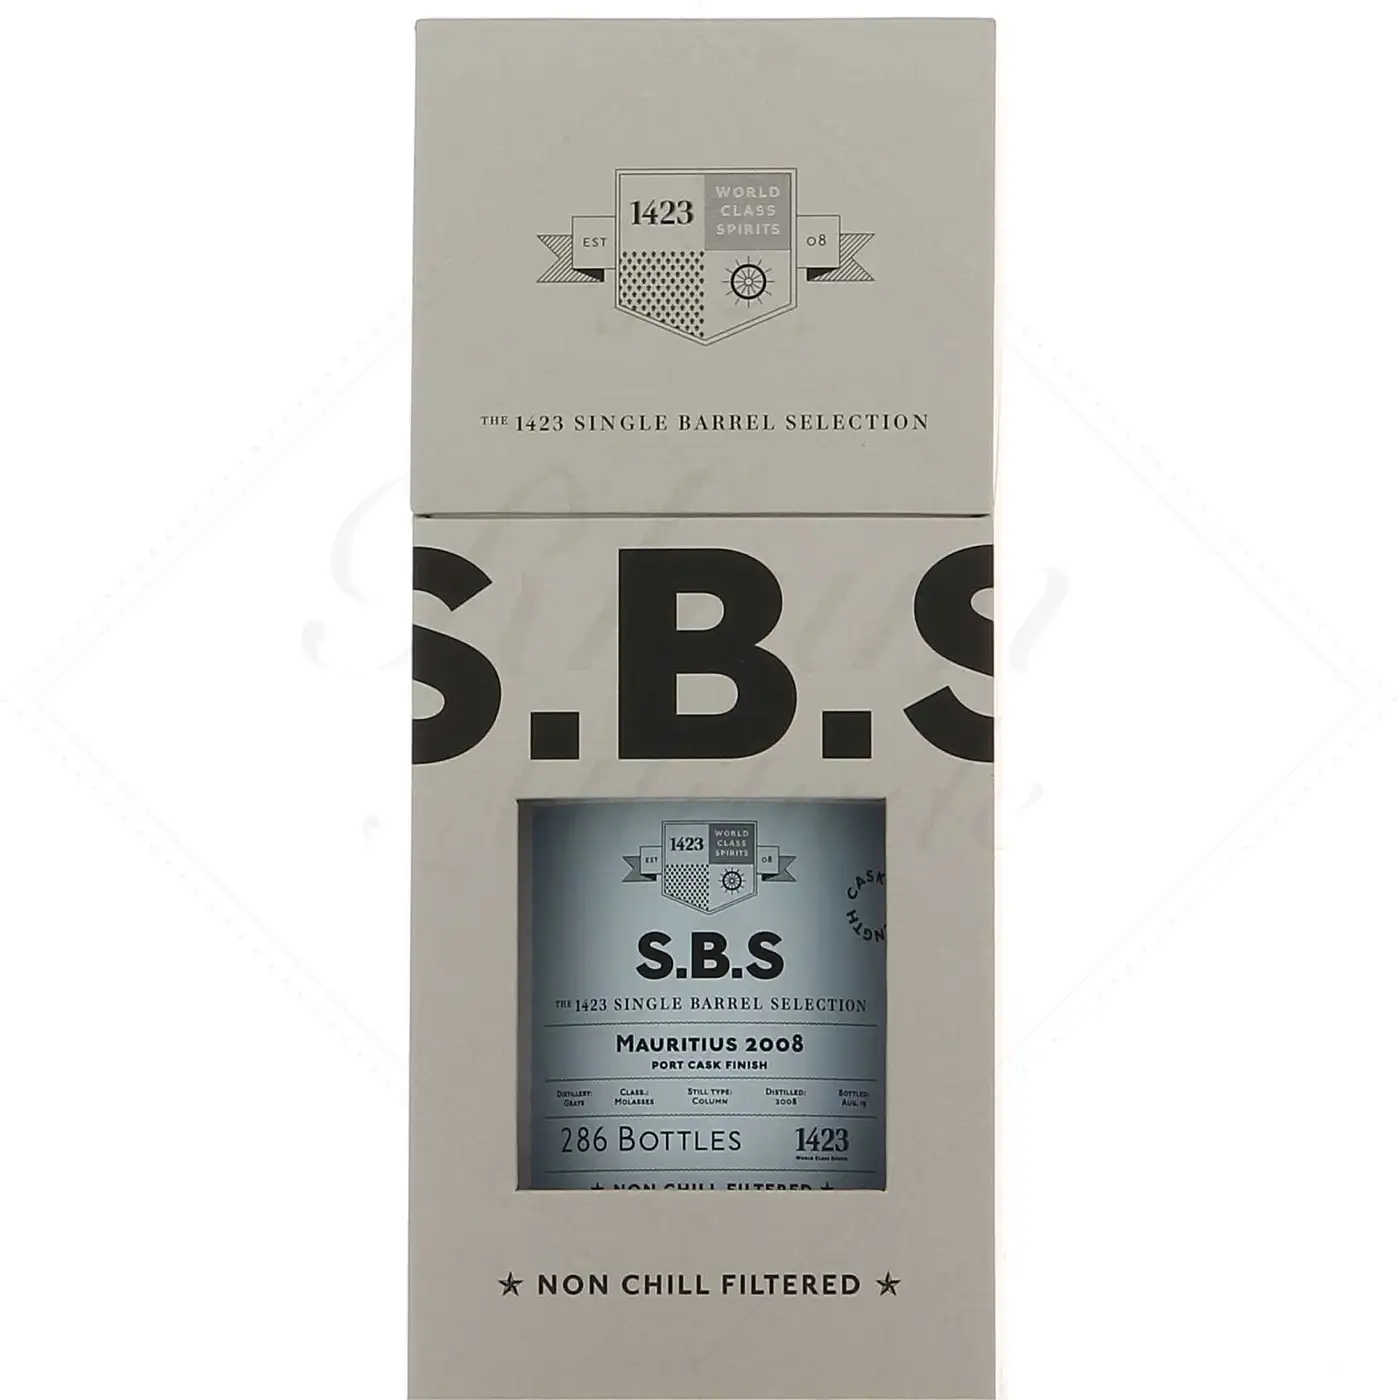 Image of the front of the bottle of the rum S.B.S Mauritius